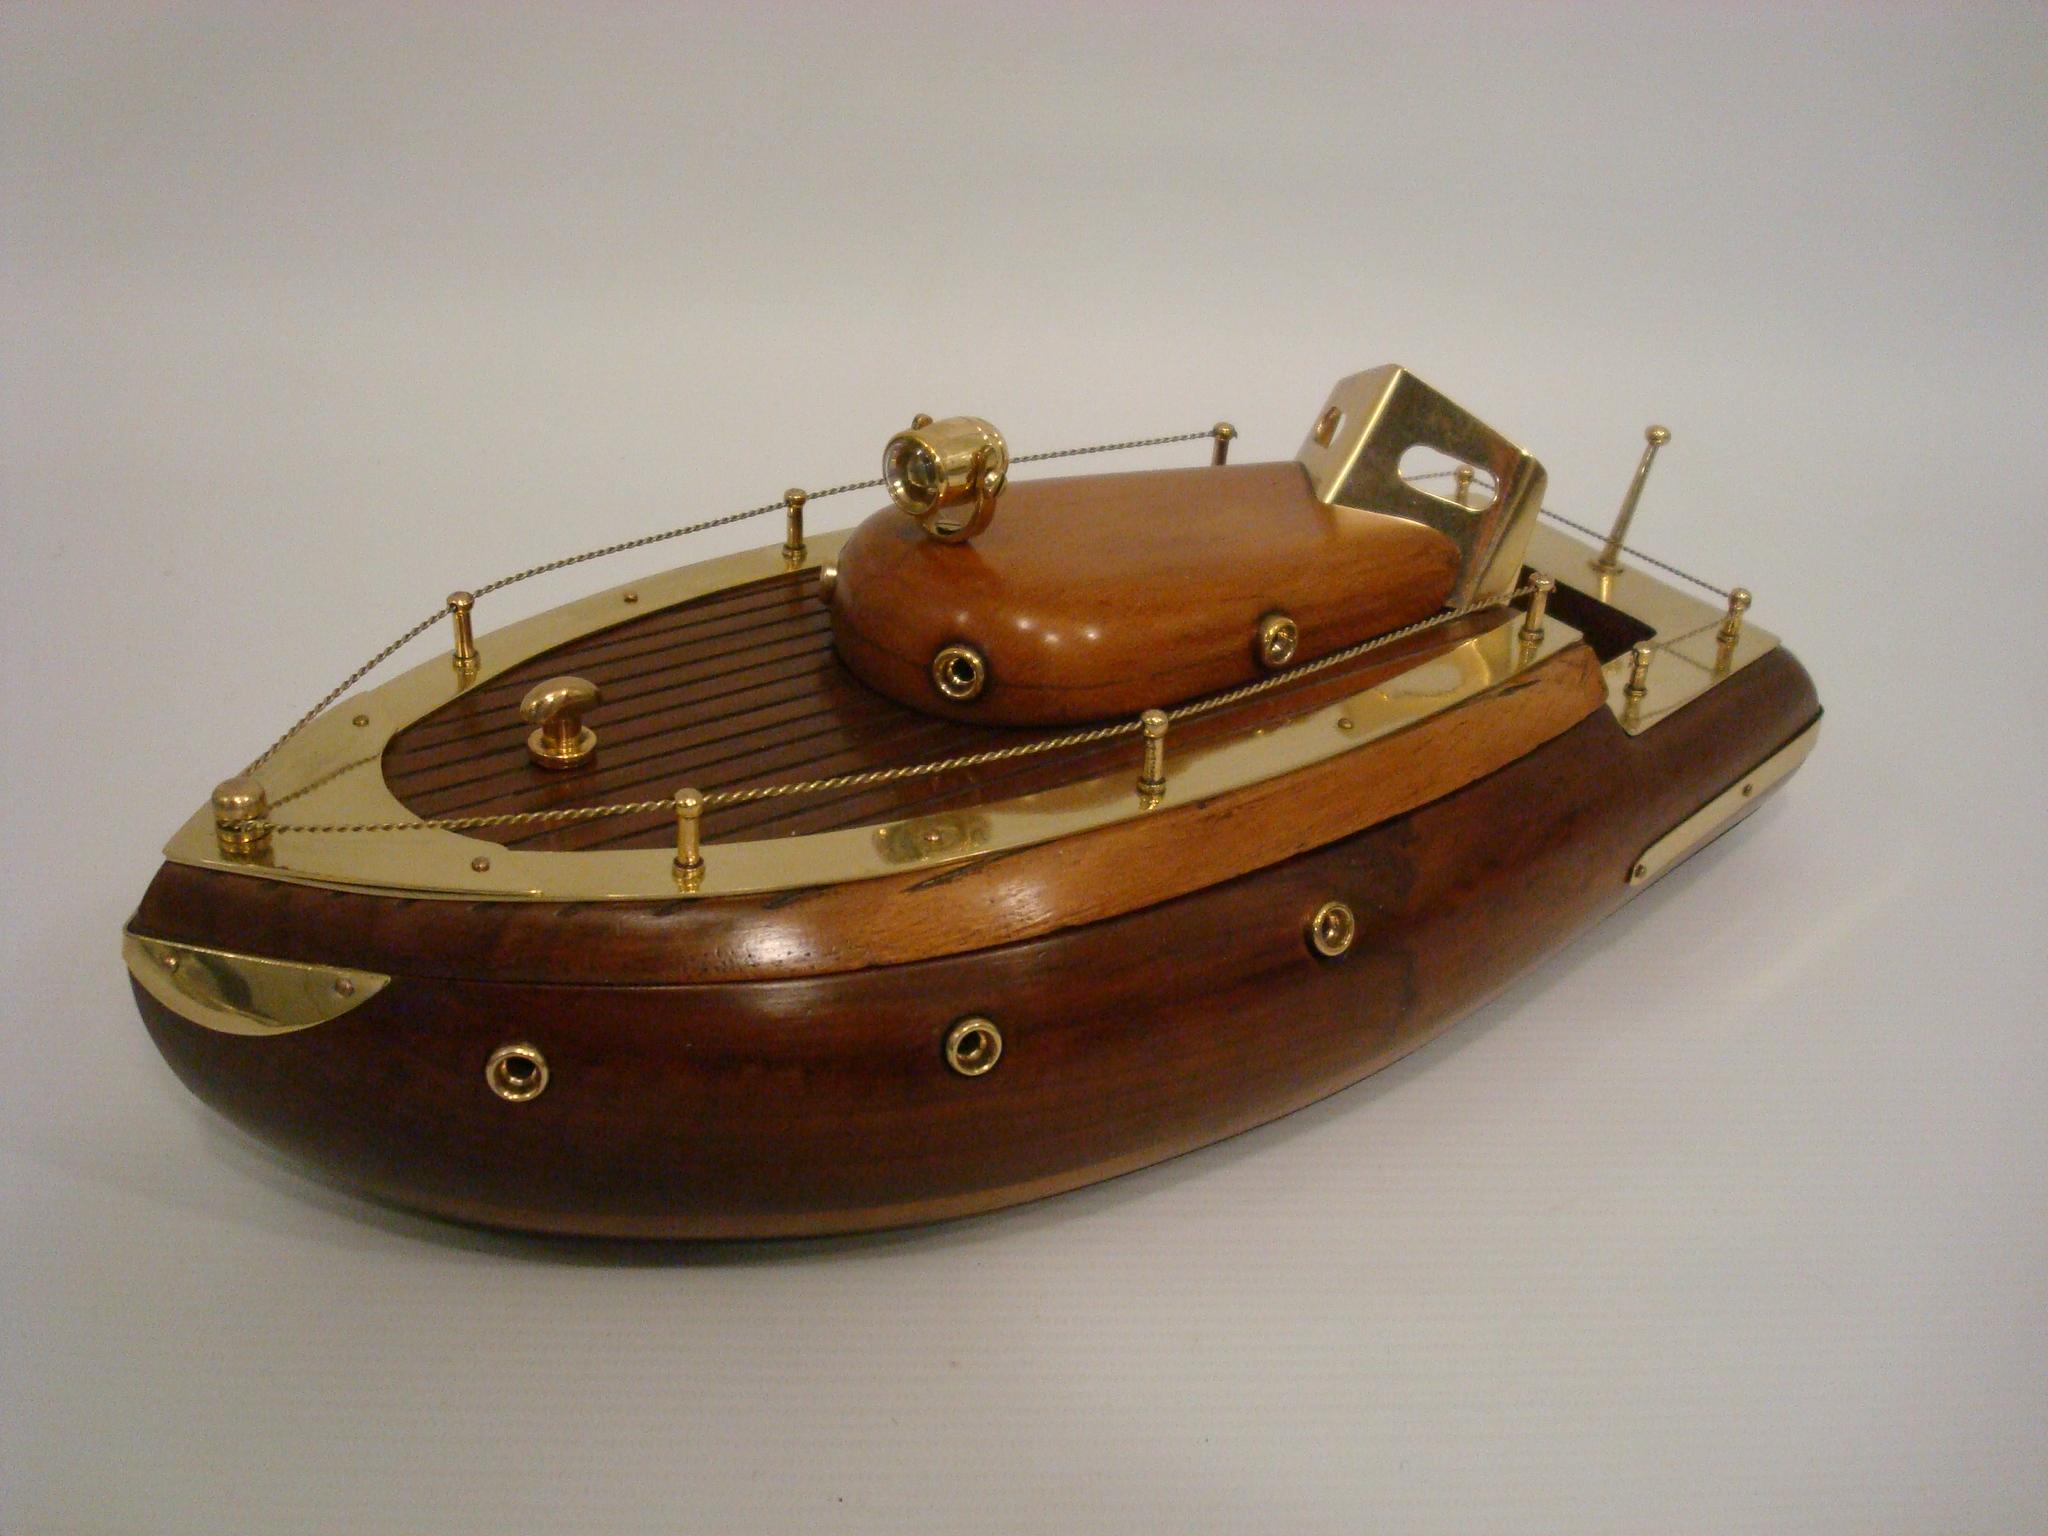 Machine Age / Art Deco wood & brass speedboat model secret box, circa 1930s. 
Nautical Streamline boat model. Unique and decorative Art Deco piece.
The Deck slides to one side, and you find a secret box, can be used for cigars / Cigarettes or any